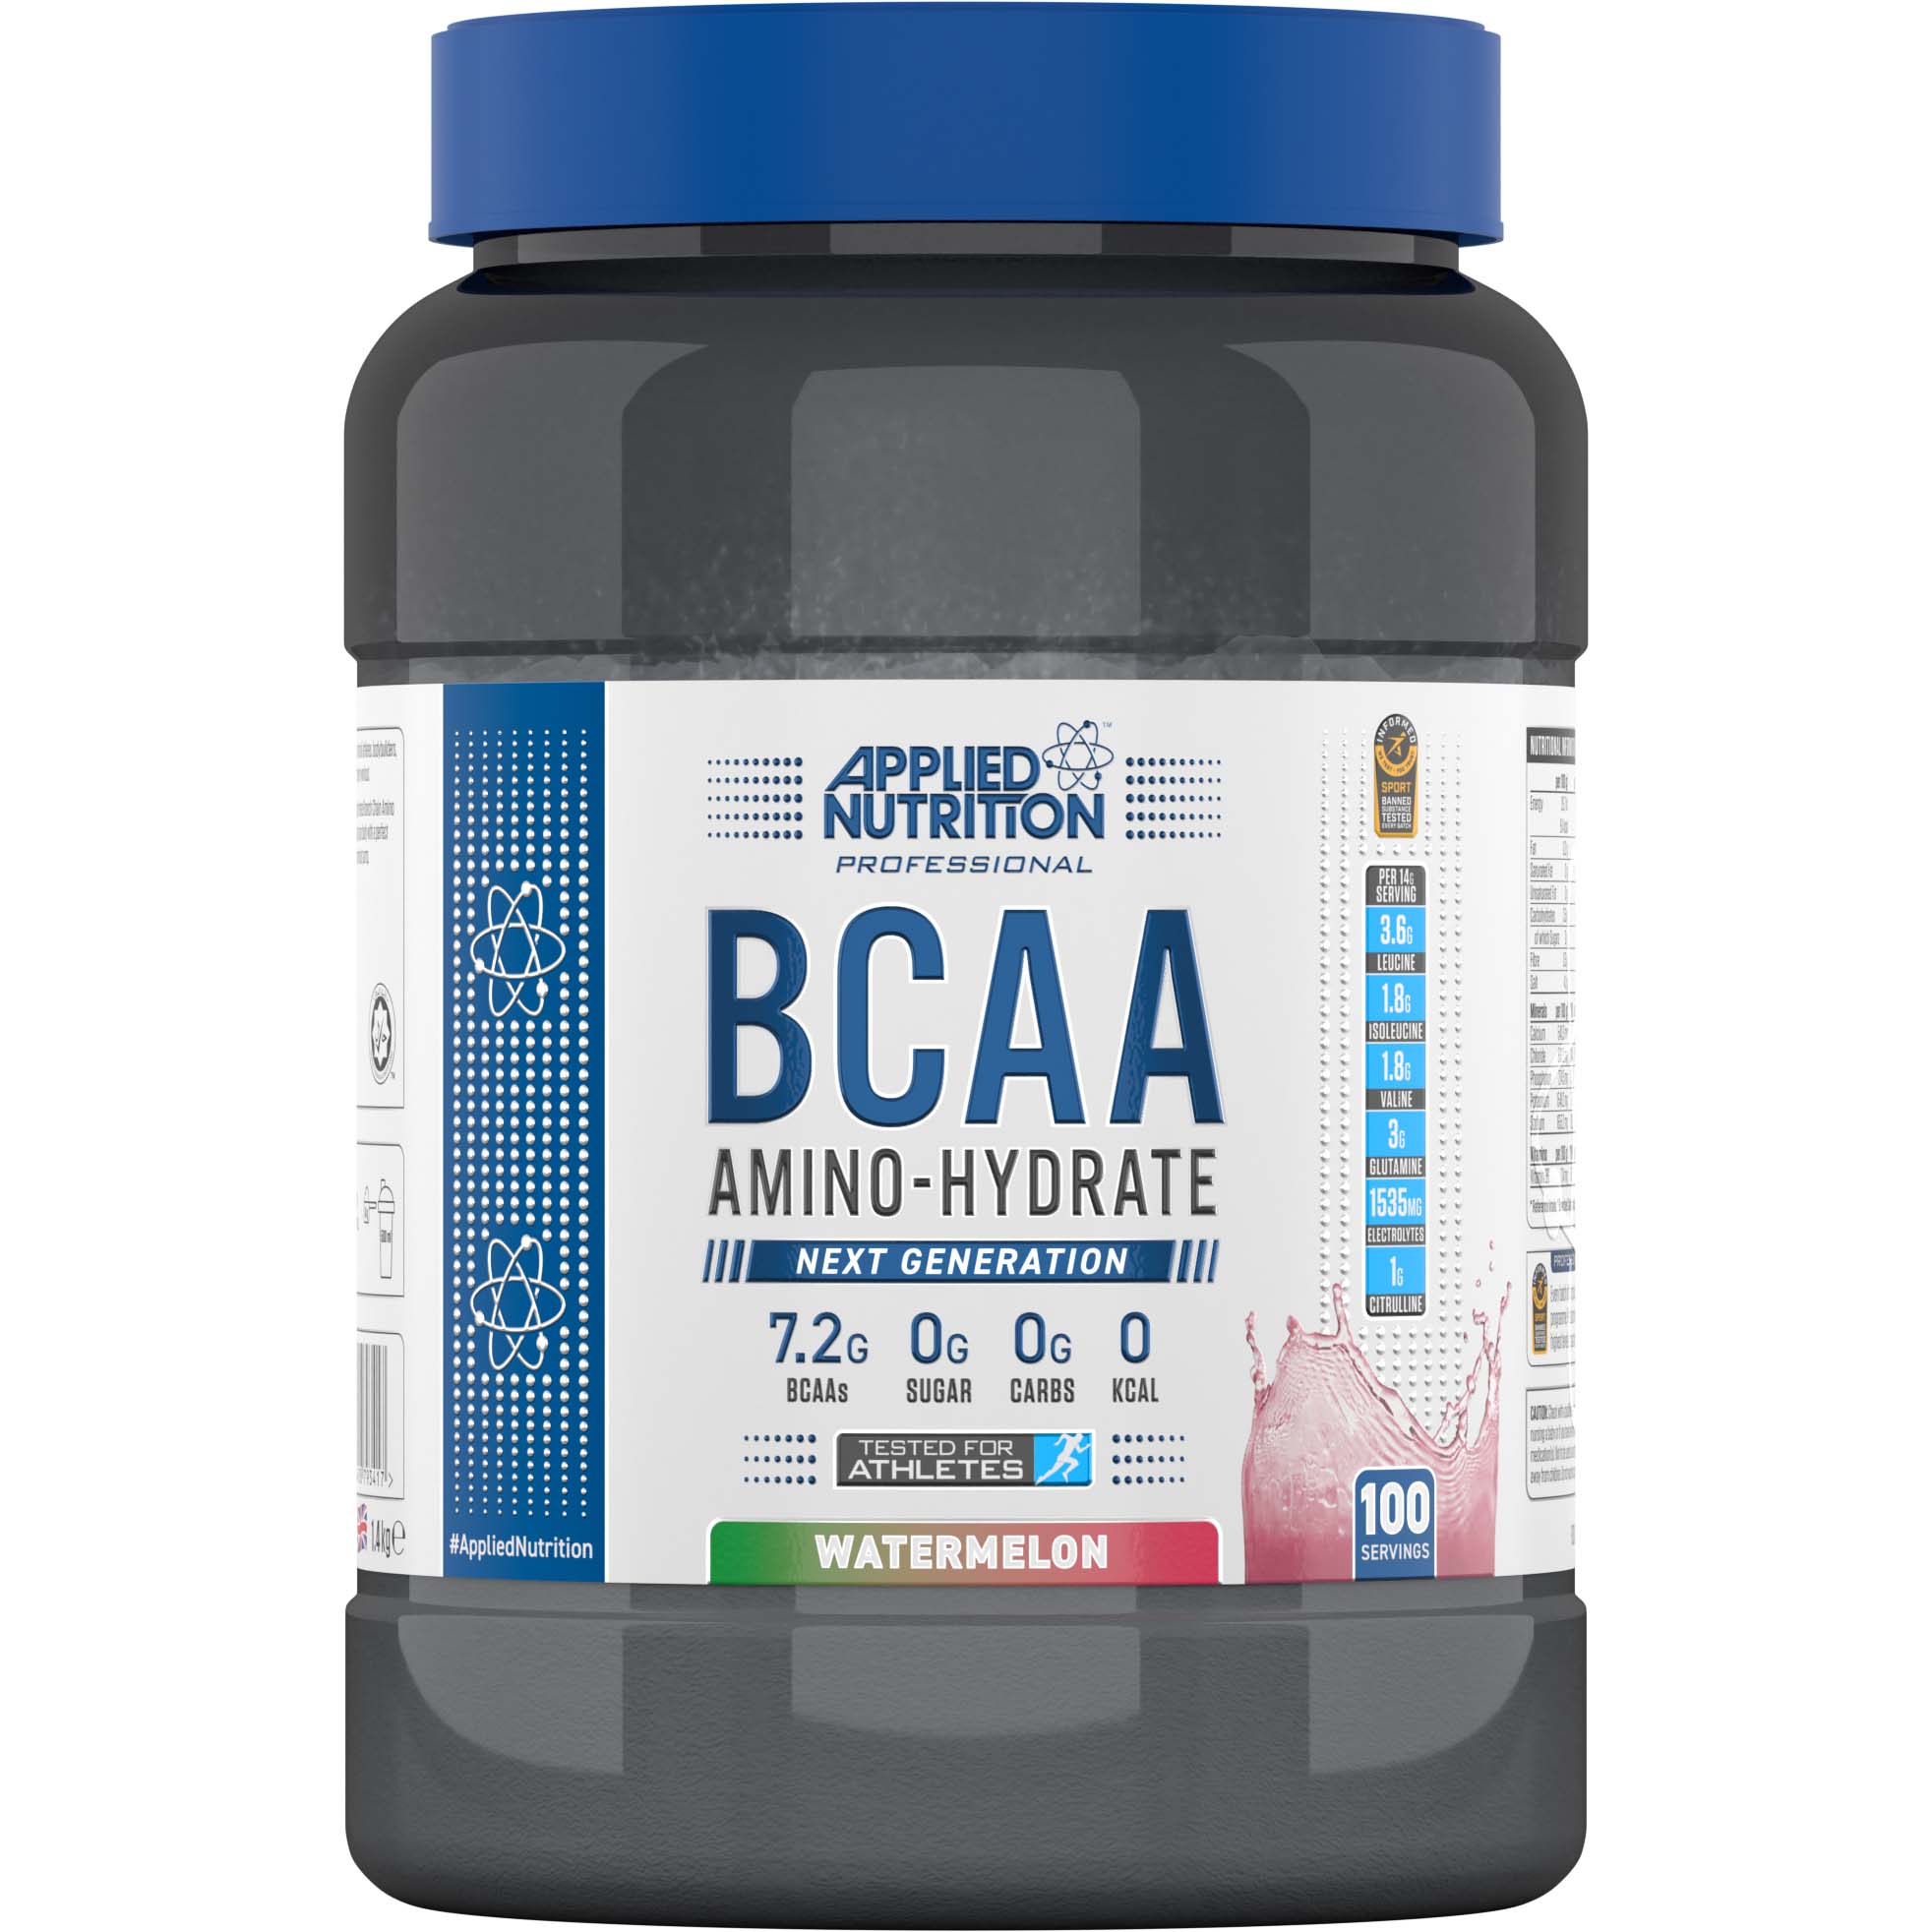 Applied Nutrition BCAA Amino Hydrate, Watermelon, 100 Serving